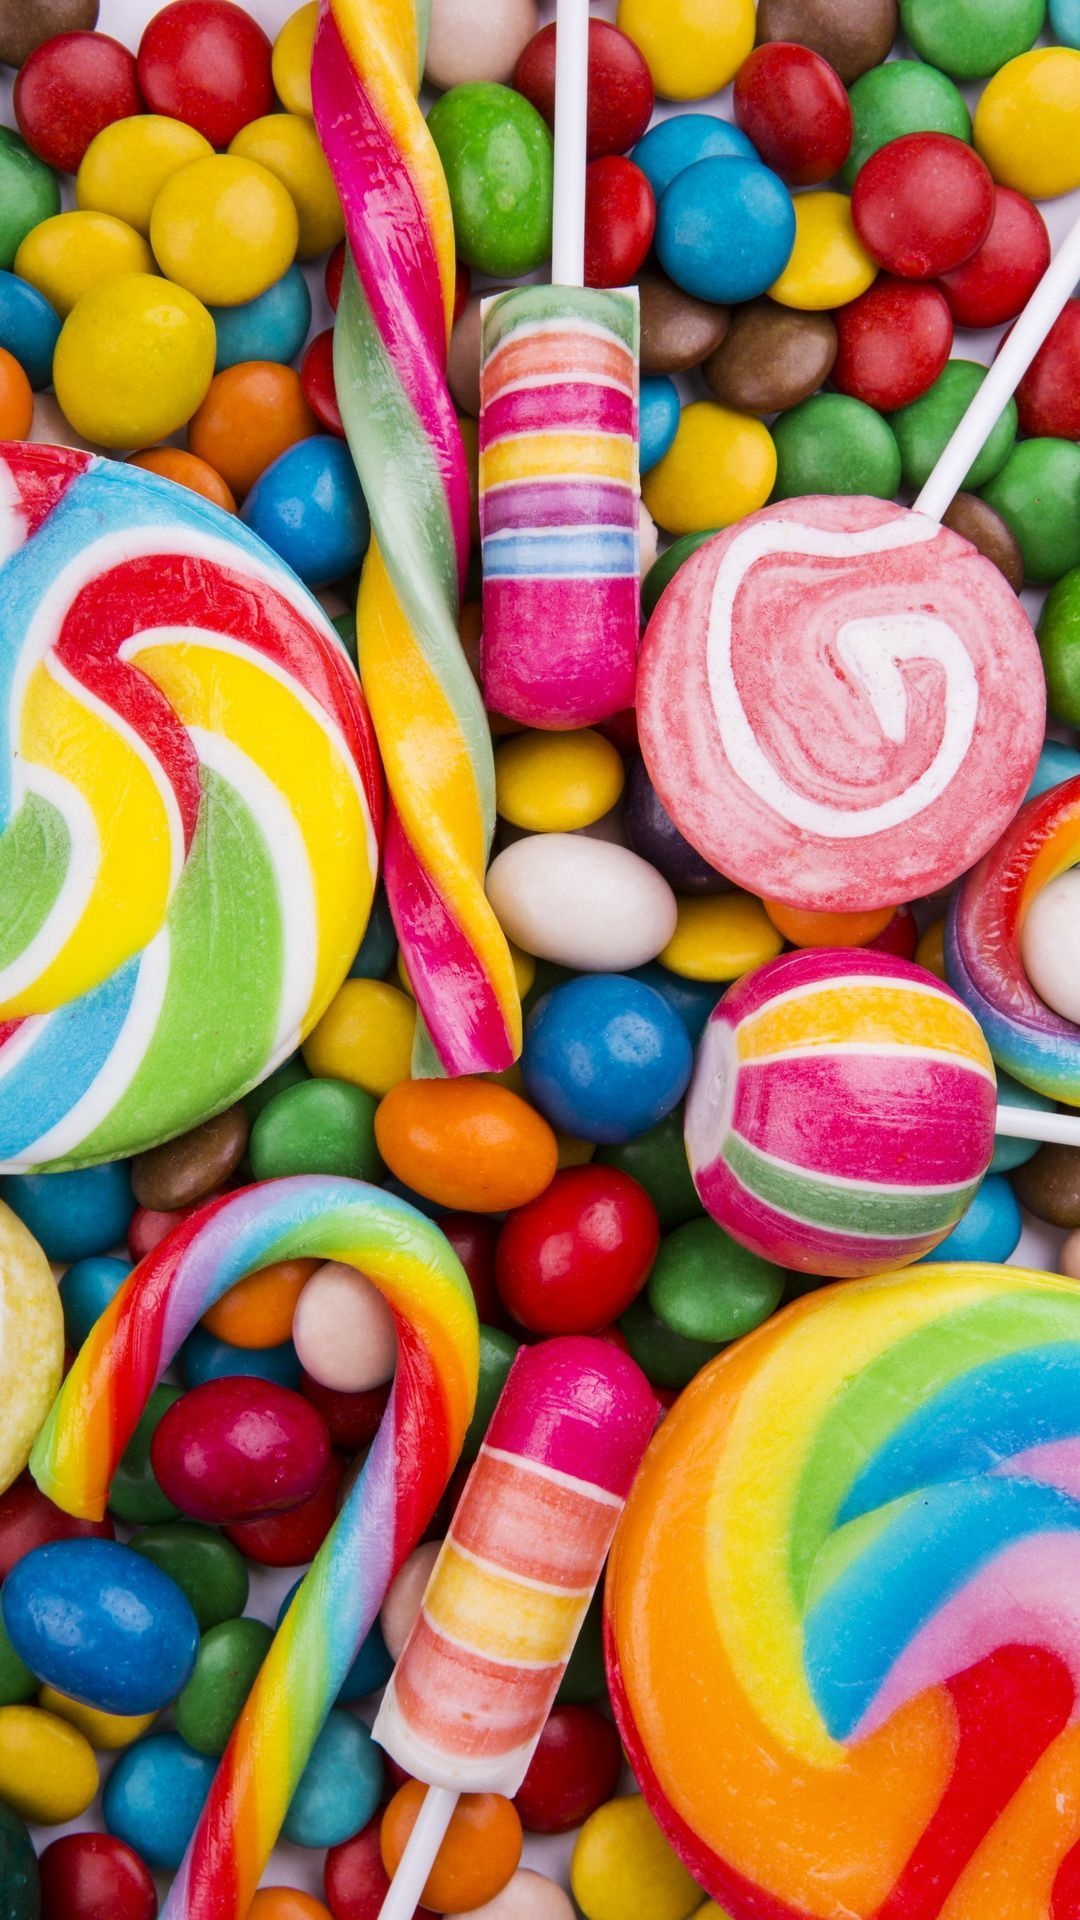 Sugary candy wallpapers, Sweet cravings, Eye-catching designs, Delicious treats, 1080x1920 Full HD Phone